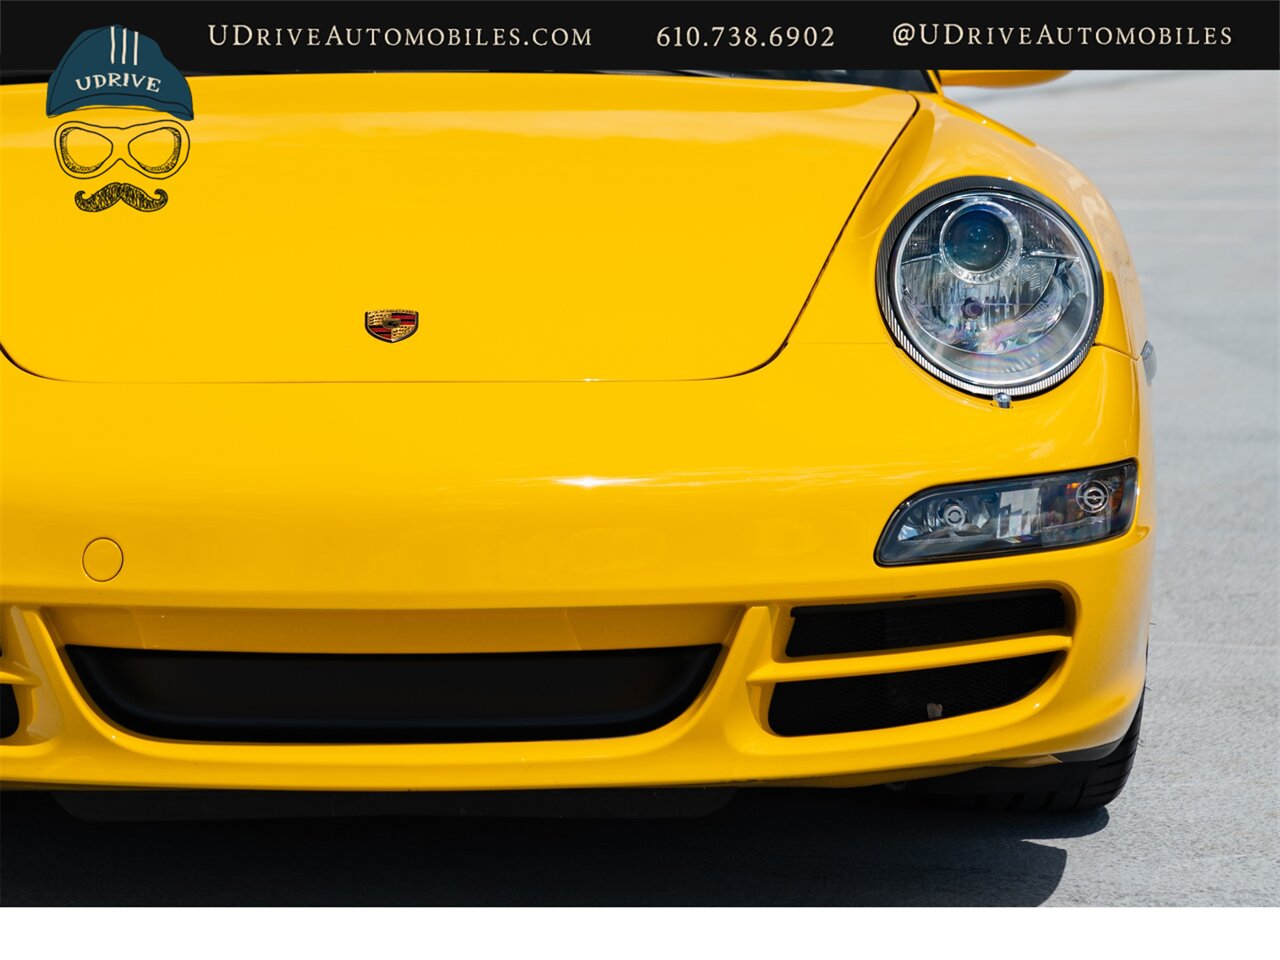 2006 Porsche 911 Carrera 4S  997 C4S 6 Speed Cocoa Full Lthr Chrono Sport Exhaust Special Color Combo - Photo 12 - West Chester, PA 19382